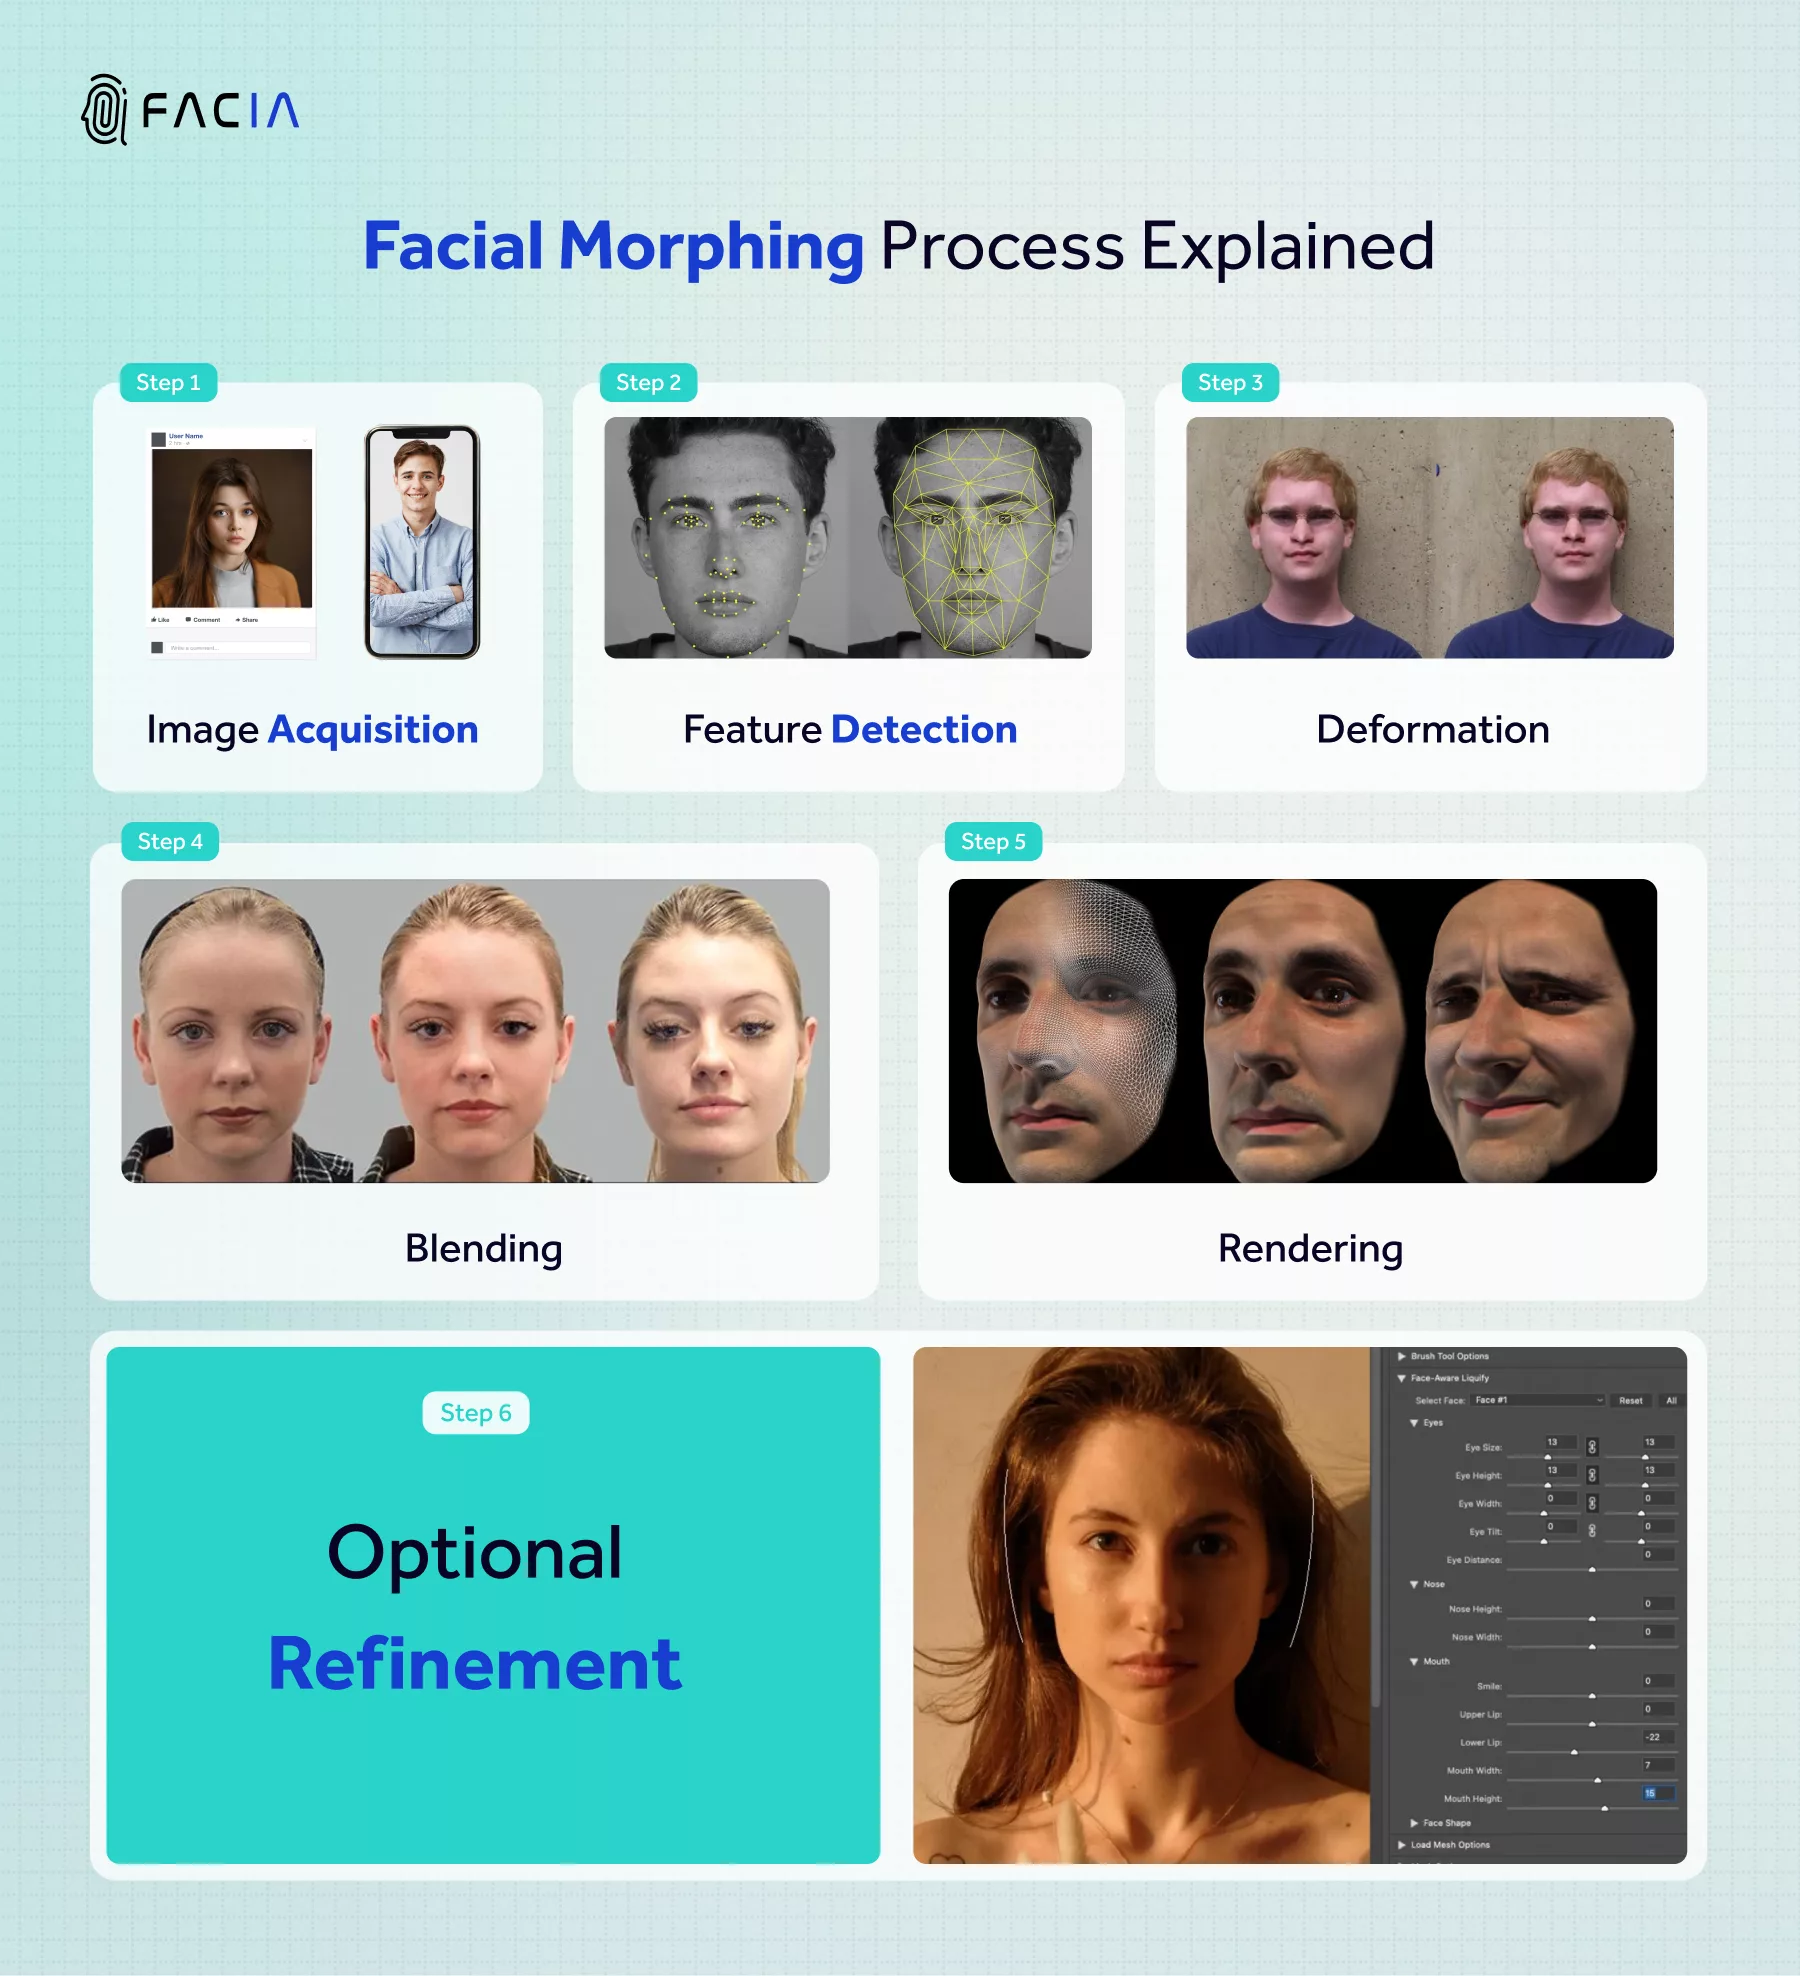 This is a pictorial illustration of 6 Steps in creating a face morph. 1) Image Acquisition 2) Feature Detection 3) Deformation 4) Blending 5) Rendering 6) Refinement